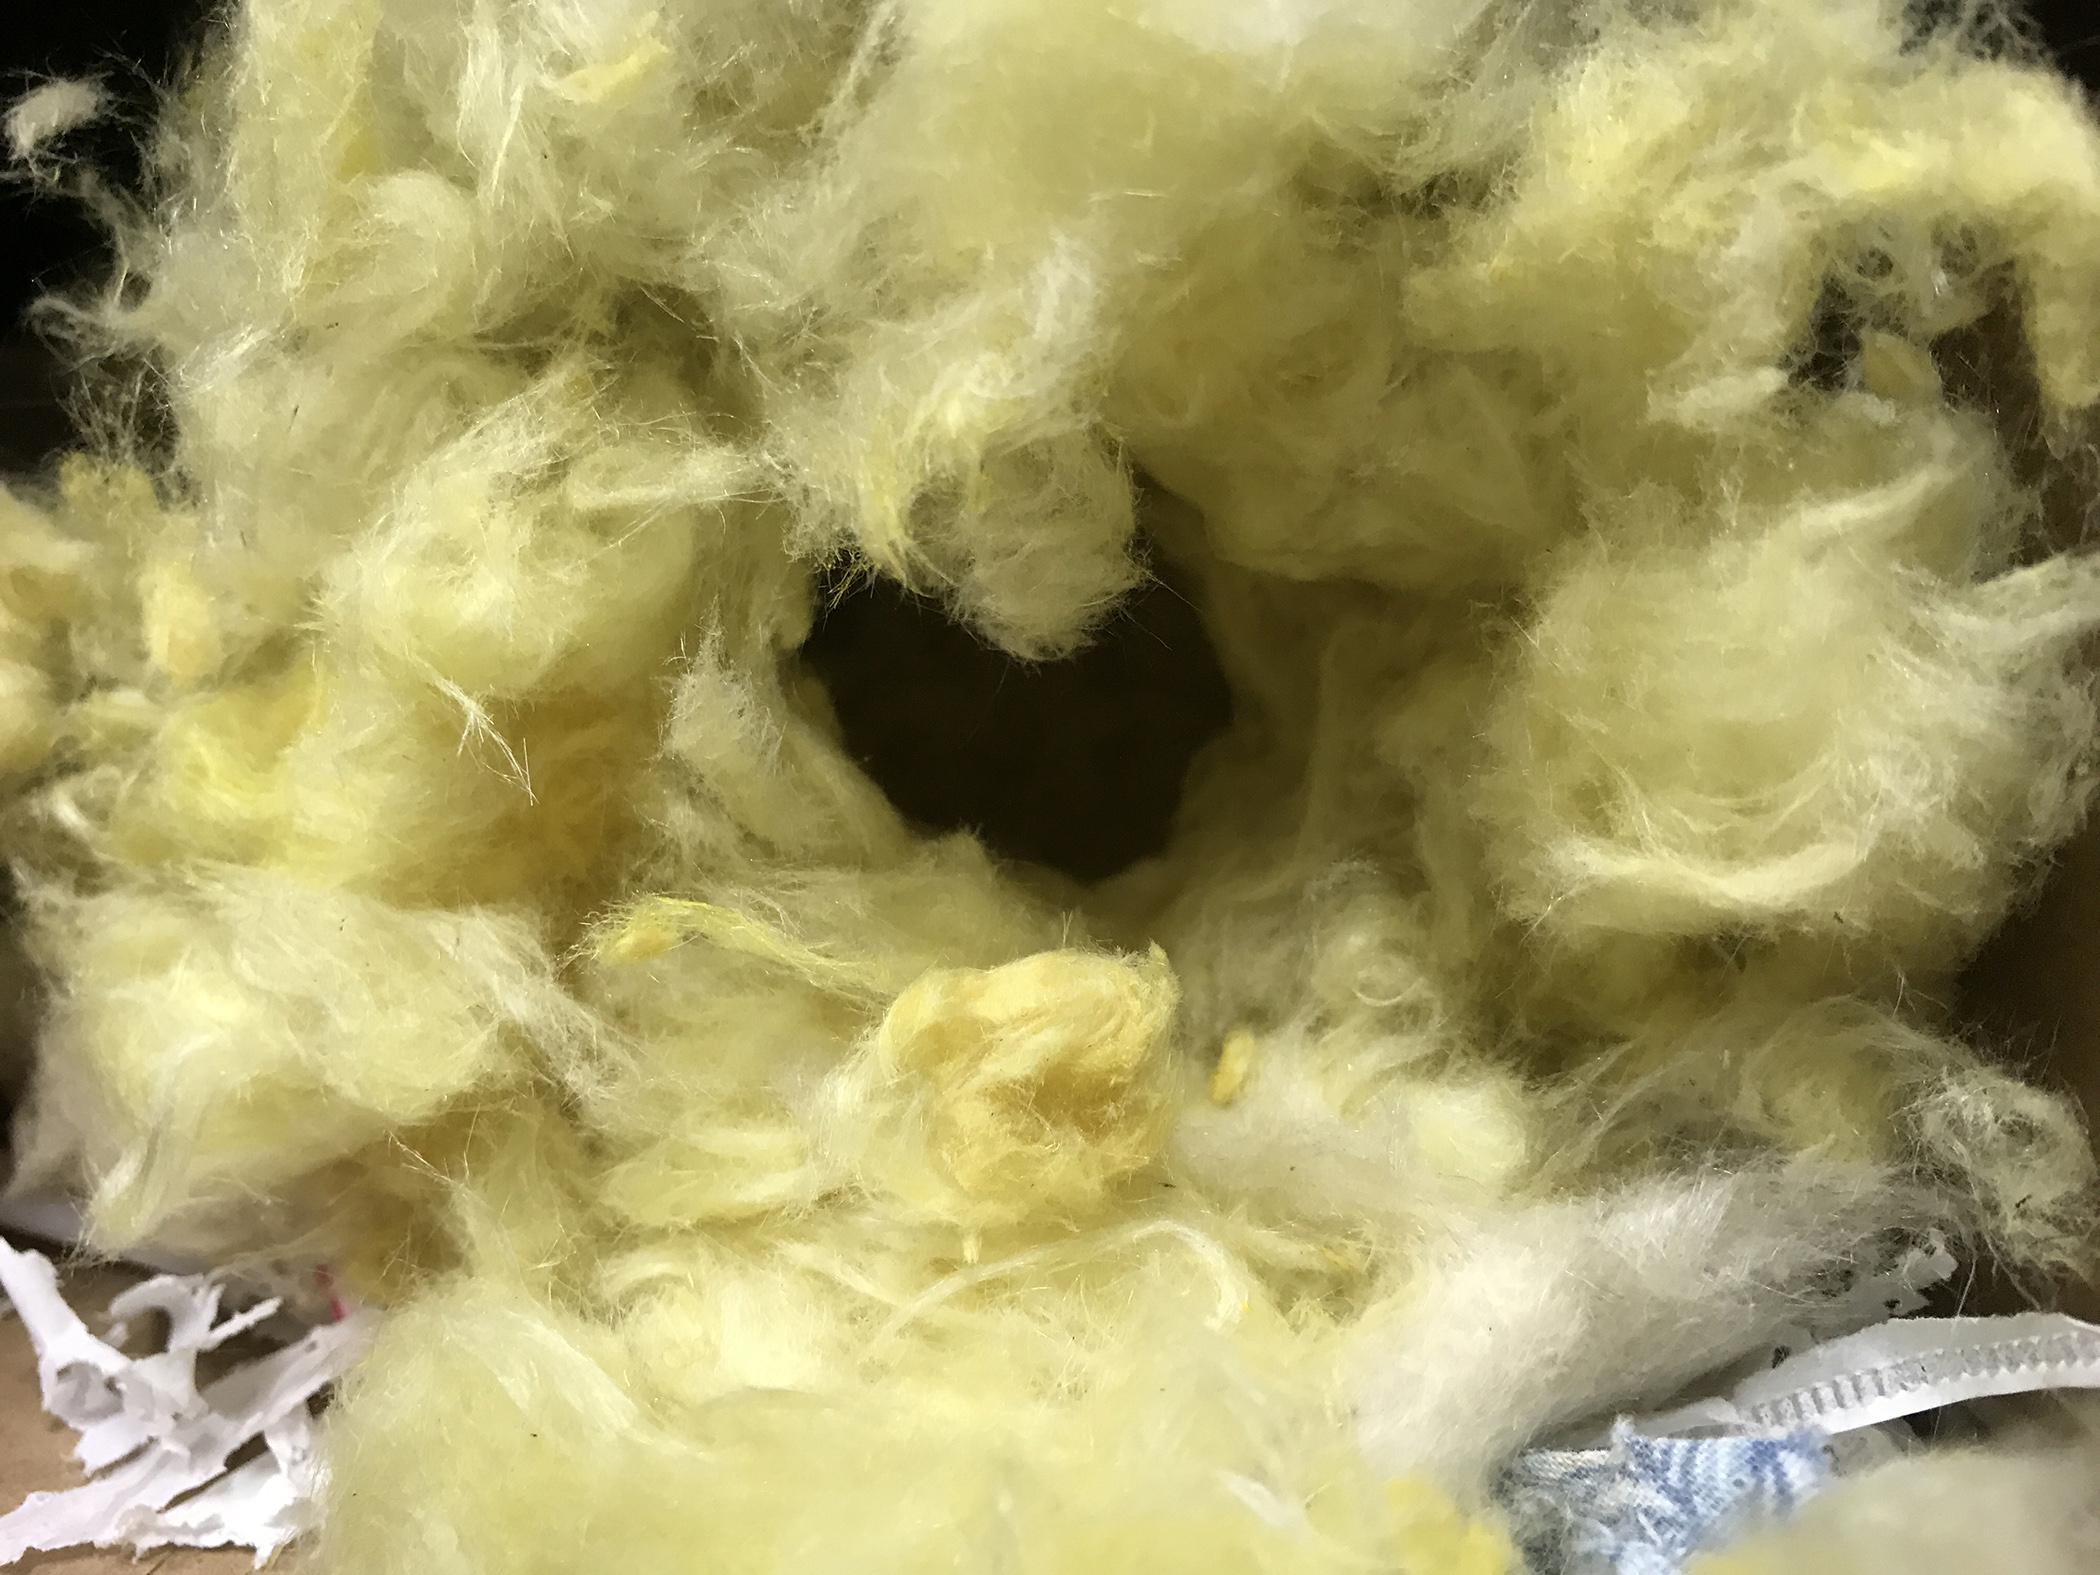 a nest built by mice using insulation and a variety of other materials